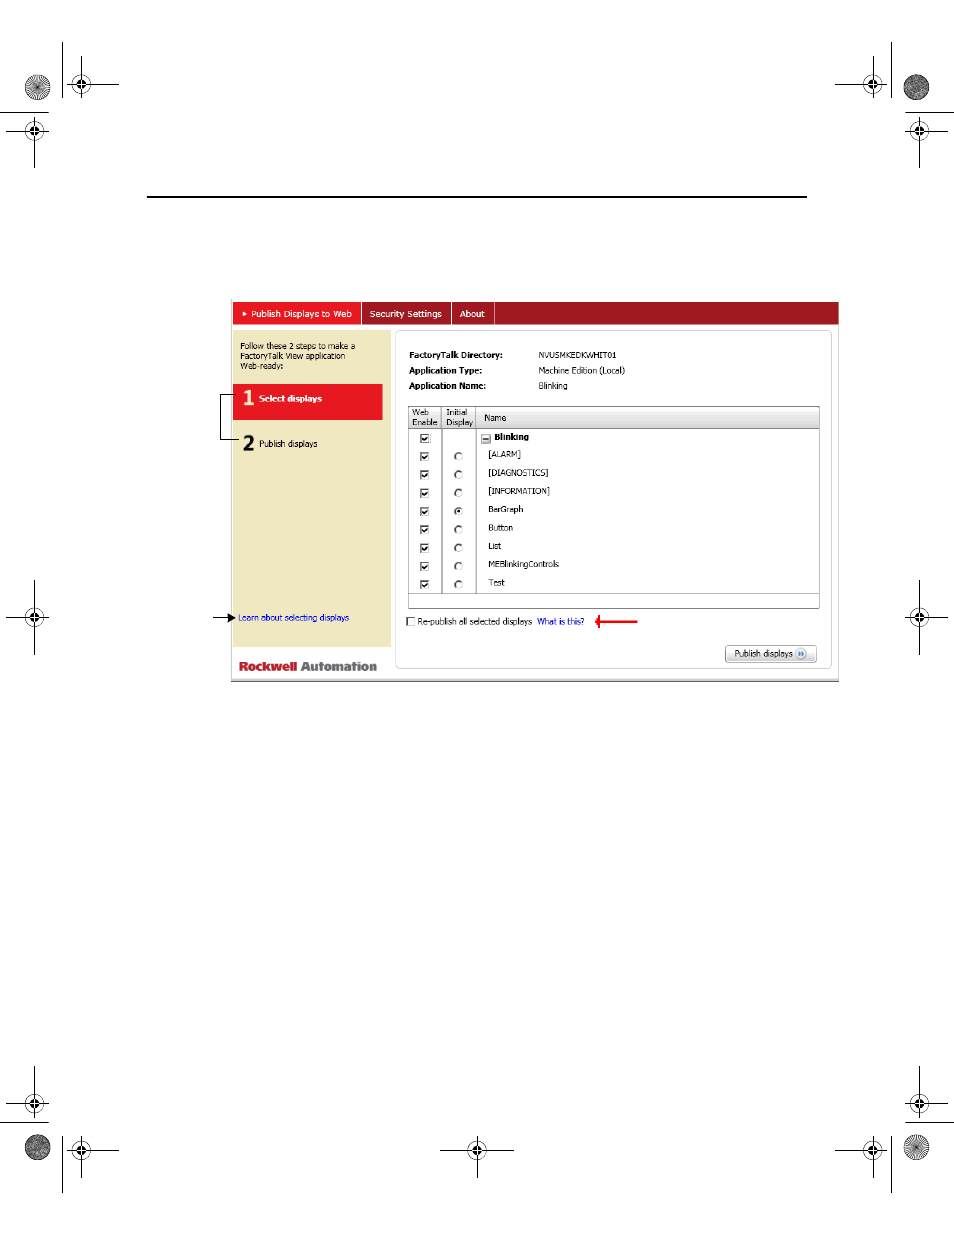 Rockwell Automation FactoryTalk ViewPoint Quick Start Guide User Manual | Page 39 / 46